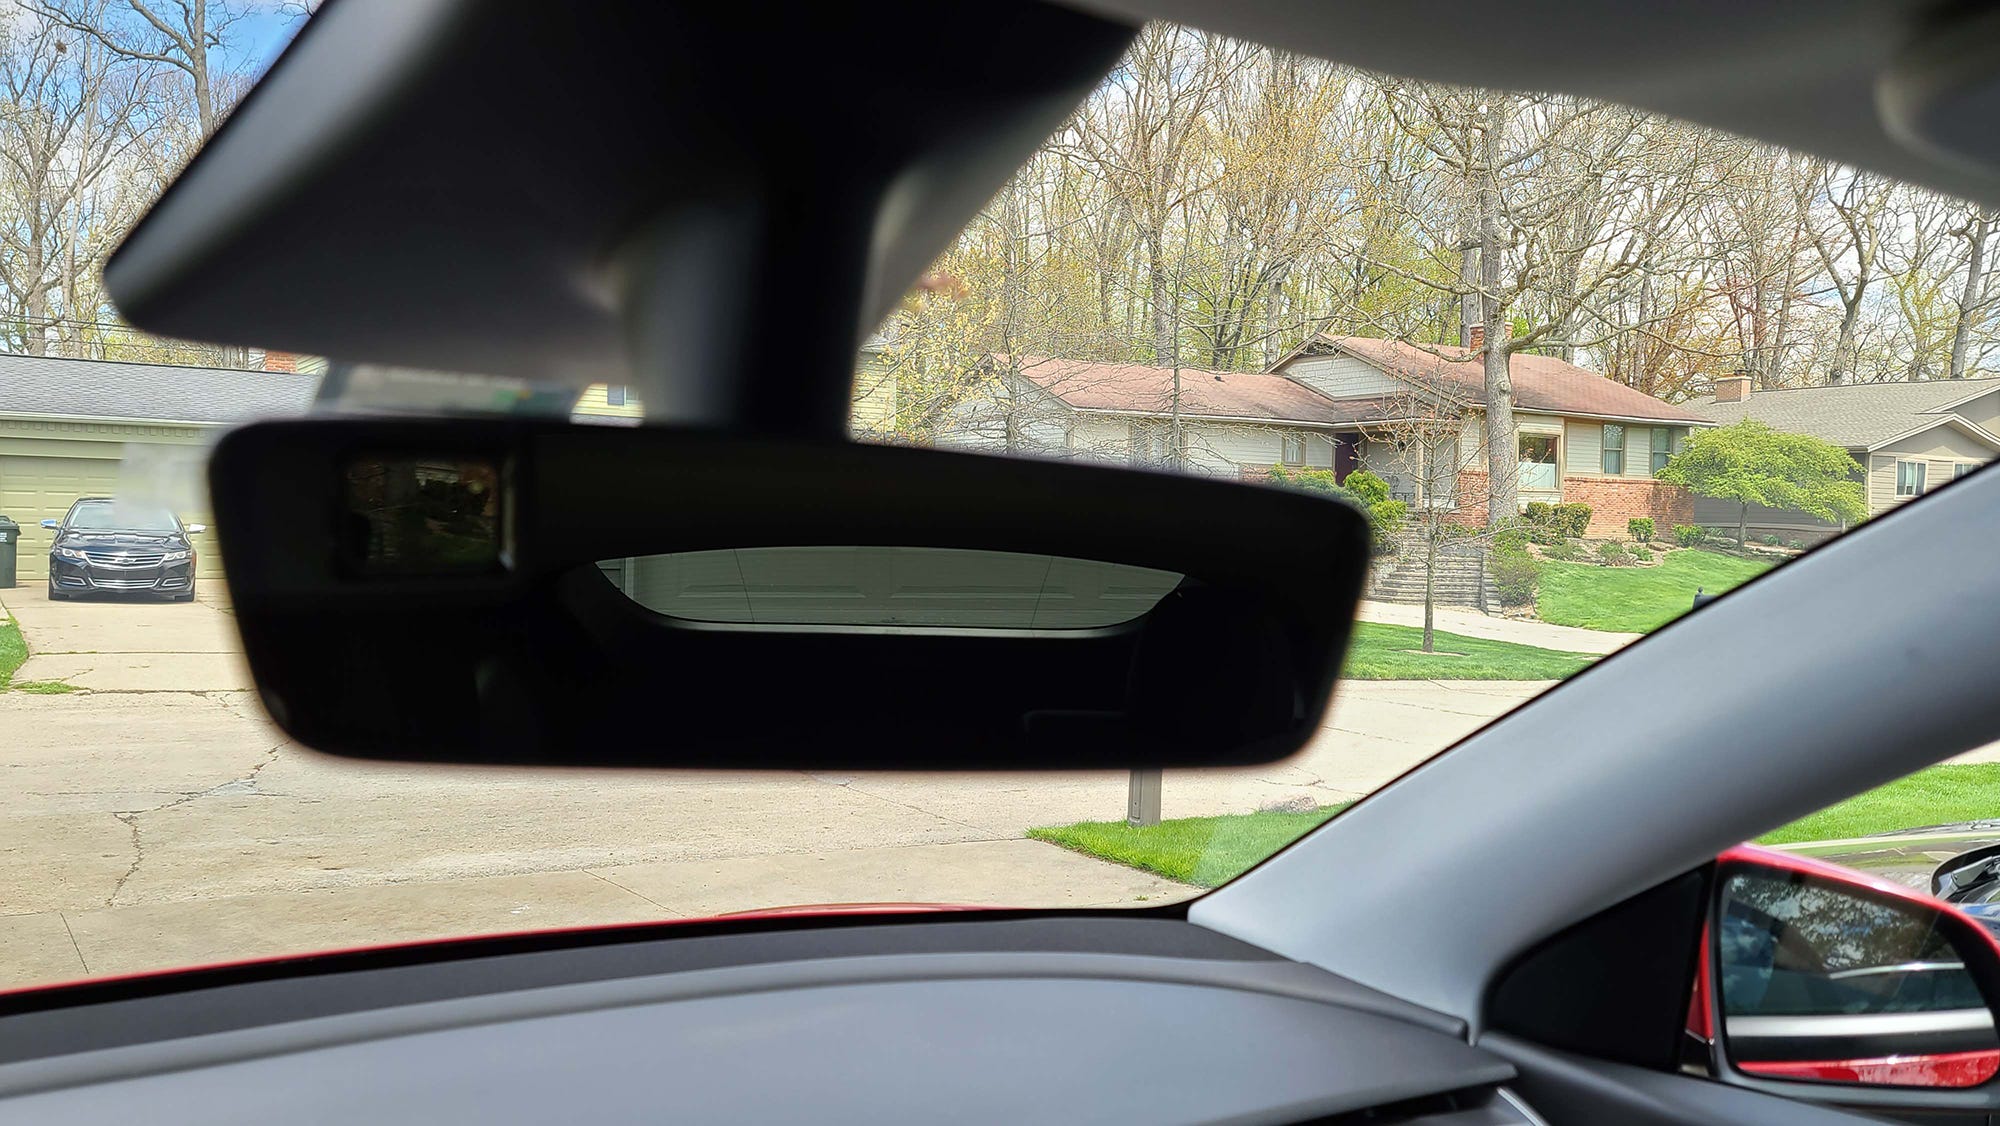 The Tesla Model Y has a hatchback, but its rear visibility is limited compared to the Model 3 sedan.